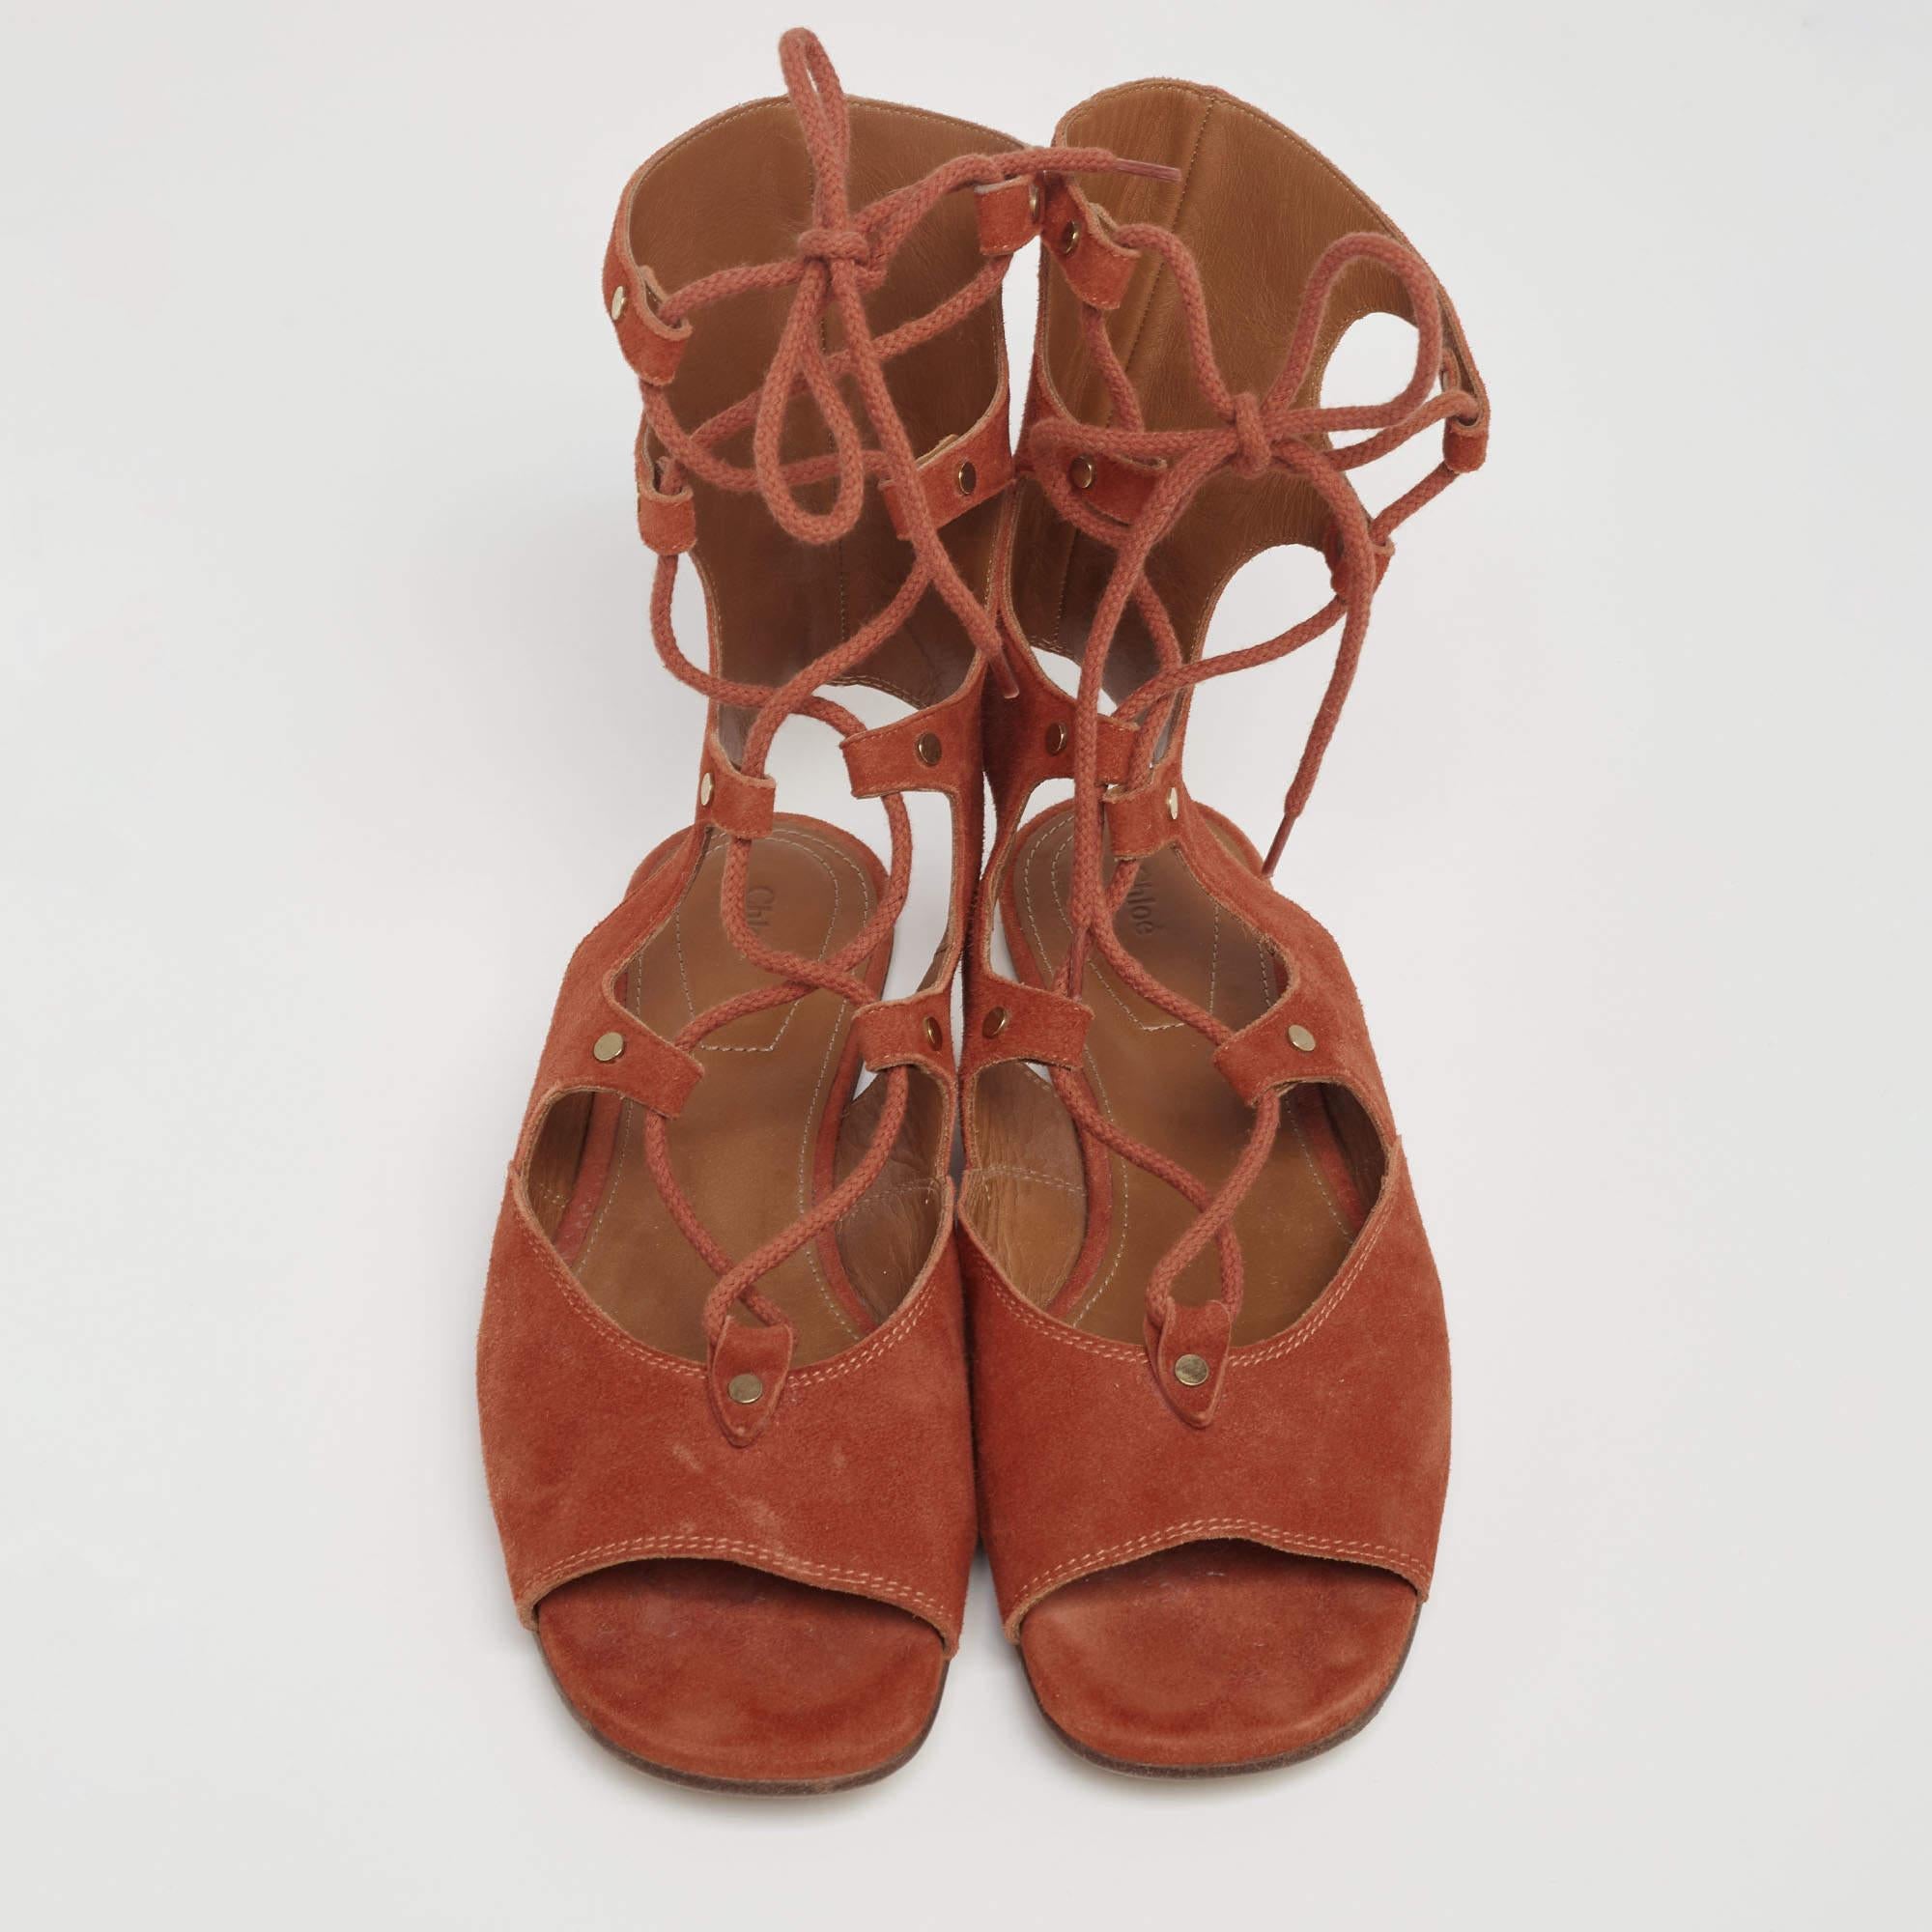 Catch everyone's admiring glances with these gladiator sandals from Chloe. They've been wonderfully crafted from suede and styled with open toes, lace-ups, and comfortable leather insoles. They'll look great with casual wear.

Includes: Original